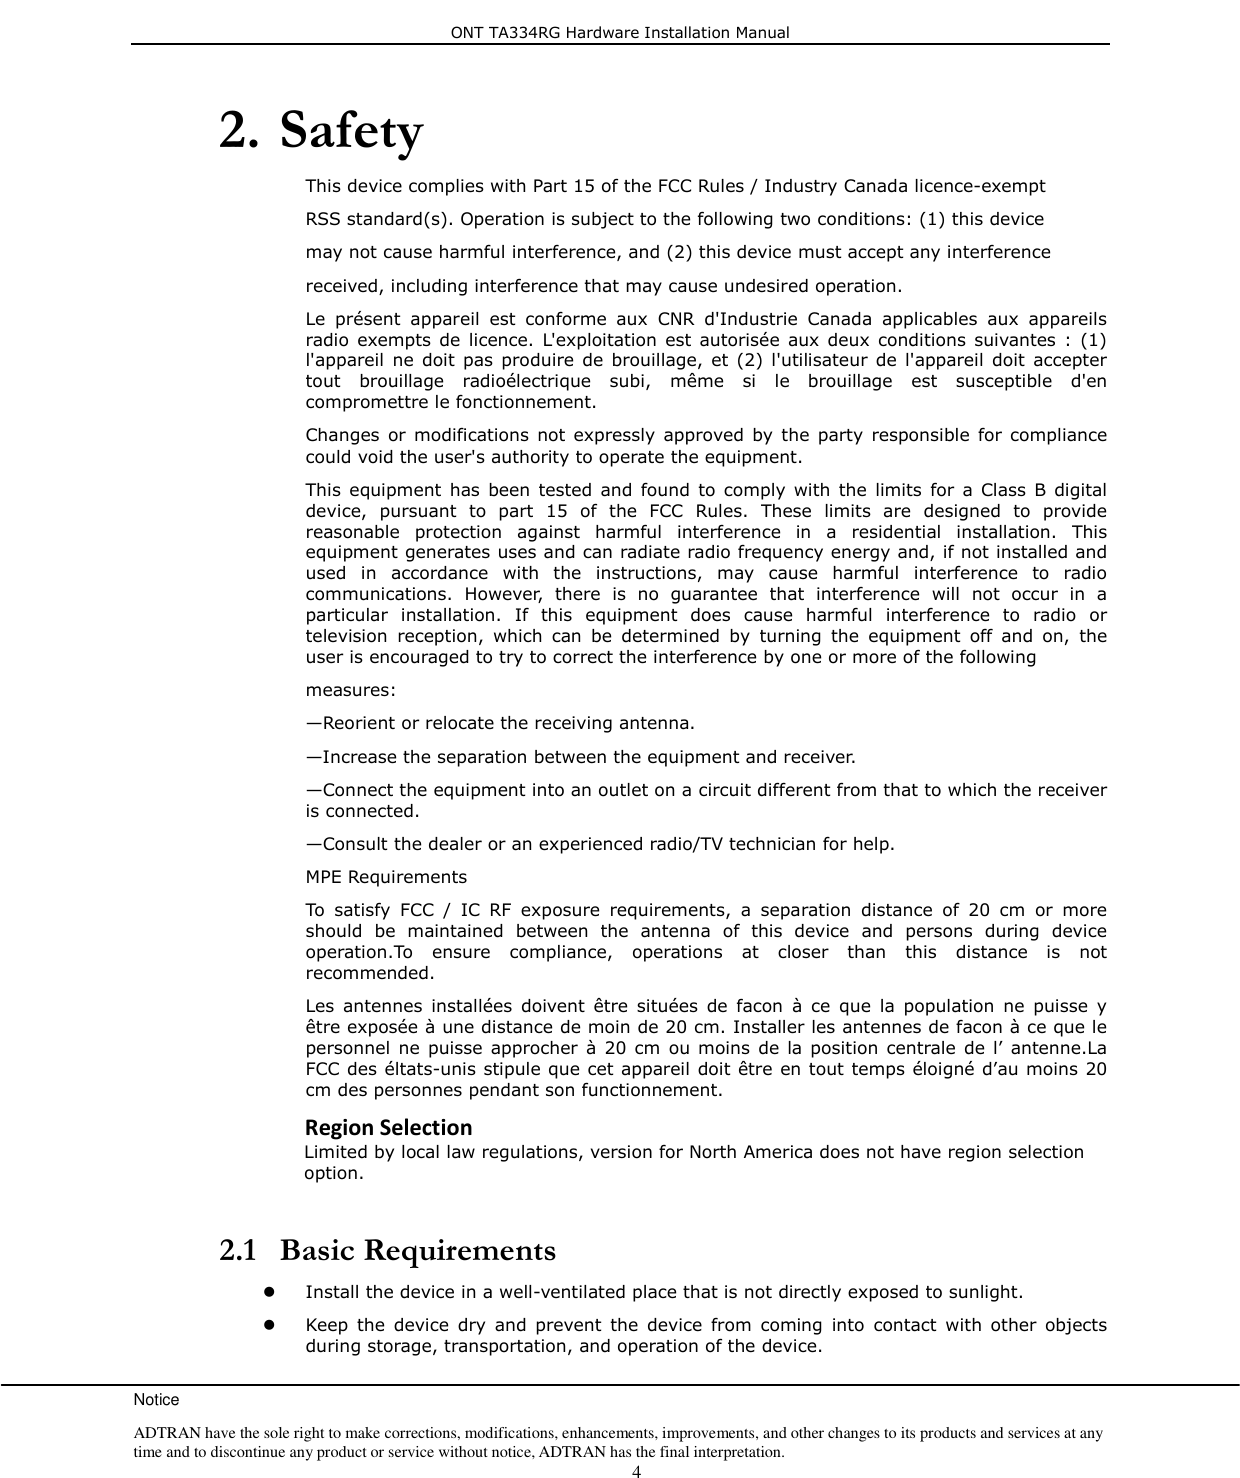 ONT TA334RG Hardware Installation Manual Notice ADTRAN have the sole right to make corrections, modifications, enhancements, improvements, and other changes to its products and services at any time and to discontinue any product or service without notice, ADTRAN has the final interpretation.    4 2. Safety This device complies with Part 15 of the FCC Rules / Industry Canada licence-exempt  RSS standard(s). Operation is subject to the following two conditions: (1) this device   may not cause harmful interference, and (2) this device must accept any interference   received, including interference that may cause undesired operation. Le  présent  appareil  est  conforme  aux  CNR  d&apos;Industrie  Canada  applicables  aux  appareils radio  exempts de  licence.  L&apos;exploitation  est  autorisée aux deux  conditions  suivantes :  (1) l&apos;appareil  ne  doit  pas  produire  de brouillage, et  (2) l&apos;utilisateur  de l&apos;appareil doit  accepter tout  brouillage  radioélectrique  subi,  même  si  le  brouillage  est  susceptible  d&apos;en compromettre le fonctionnement. Changes  or  modifications  not expressly  approved by the  party responsible  for  compliance could void the user&apos;s authority to operate the equipment. This  equipment has  been tested  and  found  to  comply with the  limits  for  a  Class B  digital device,  pursuant  to  part  15  of  the  FCC  Rules.  These  limits  are  designed  to  provide reasonable  protection  against  harmful  interference  in  a  residential  installation.  This equipment generates uses and can radiate radio frequency energy and, if not installed and used  in  accordance  with  the  instructions,  may  cause  harmful  interference  to  radio communications.  However,  there  is  no  guarantee  that  interference  will  not  occur  in  a particular  installation.  If  this  equipment  does  cause  harmful  interference  to  radio  or television  reception,  which  can  be  determined  by  turning  the  equipment  off  and  on,  the user is encouraged to try to correct the interference by one or more of the following  measures: —Reorient or relocate the receiving antenna. —Increase the separation between the equipment and receiver. —Connect the equipment into an outlet on a circuit different from that to which the receiver is connected. —Consult the dealer or an experienced radio/TV technician for help. MPE Requirements To  satisfy  FCC  /  IC  RF  exposure  requirements,  a  separation  distance  of  20  cm  or  more should  be  maintained  between  the  antenna  of  this  device  and  persons  during  device operation.To  ensure  compliance,  operations  at  closer  than  this  distance  is  not recommended.  Les  antennes  installées  doivent  être  situées  de  facon  à  ce  que  la  population  ne  puisse  y être exposée à une distance de moin de 20 cm. Installer les antennes de facon à ce que le personnel ne  puisse approcher  à 20  cm  ou moins de  la position  centrale de l’  antenne.La FCC des éltats-unis stipule que cet appareil doit être en tout temps éloigné d’au moins 20 cm des personnes pendant son functionnement. Region Selection Limited by local law regulations, version for North America does not have region selection option.   2.1 Basic Requirements  Install the device in a well-ventilated place that is not directly exposed to sunlight.  Keep  the  device  dry  and  prevent  the  device  from  coming  into  contact  with  other  objects during storage, transportation, and operation of the device. 